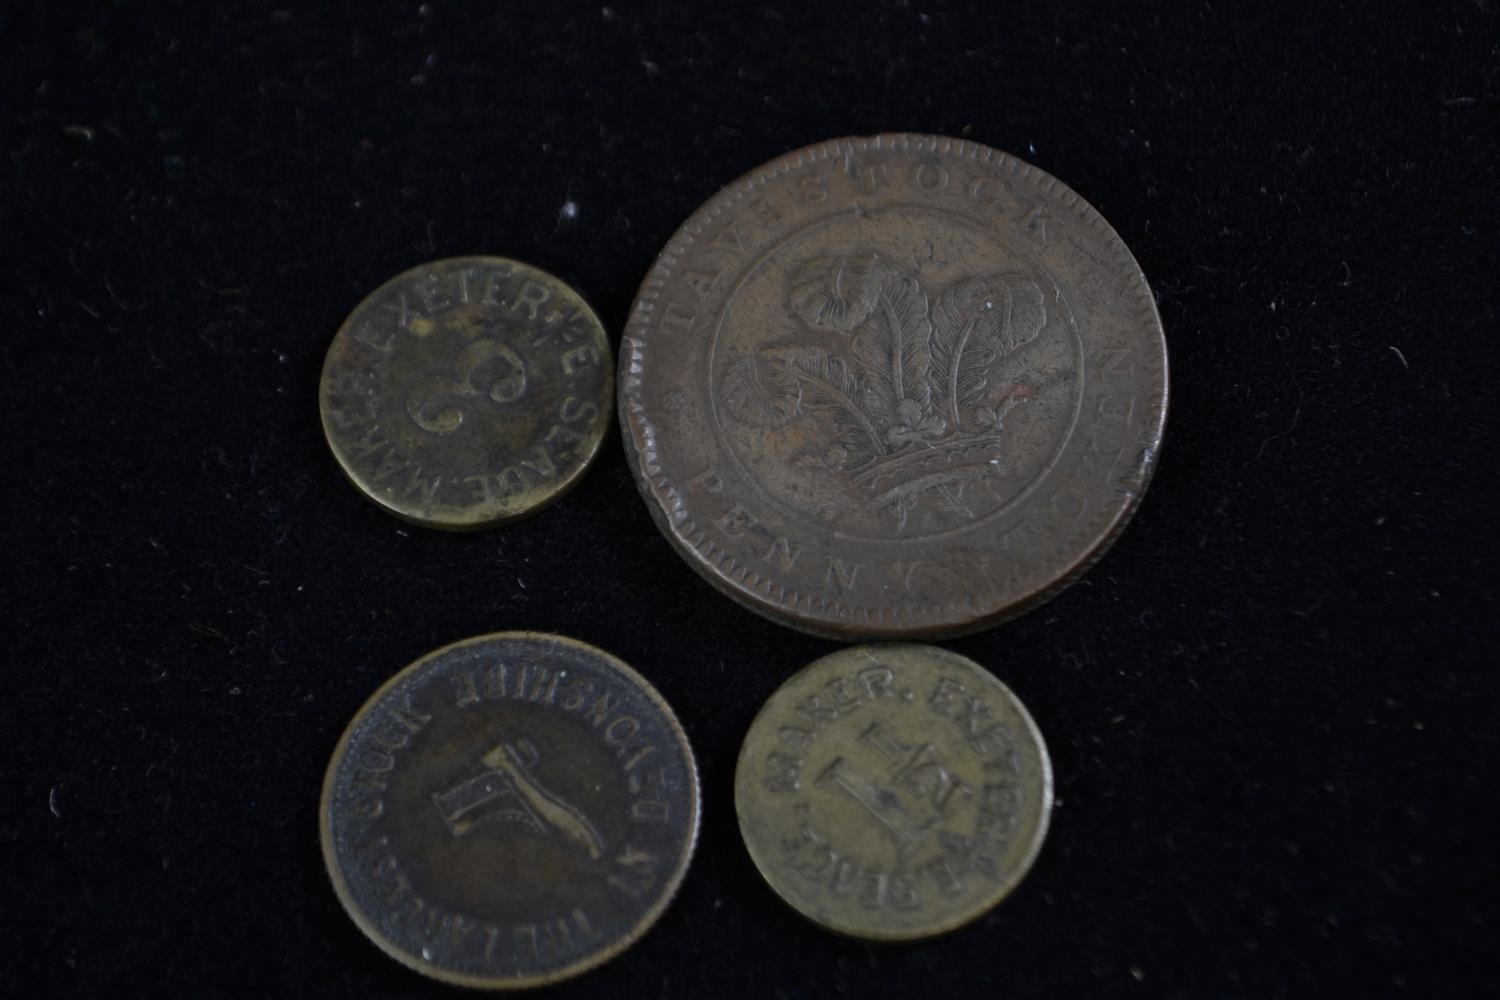 Tavistock mines penny token, two Black Down's Lions Exeter tokens & Dick's Plymouth token 